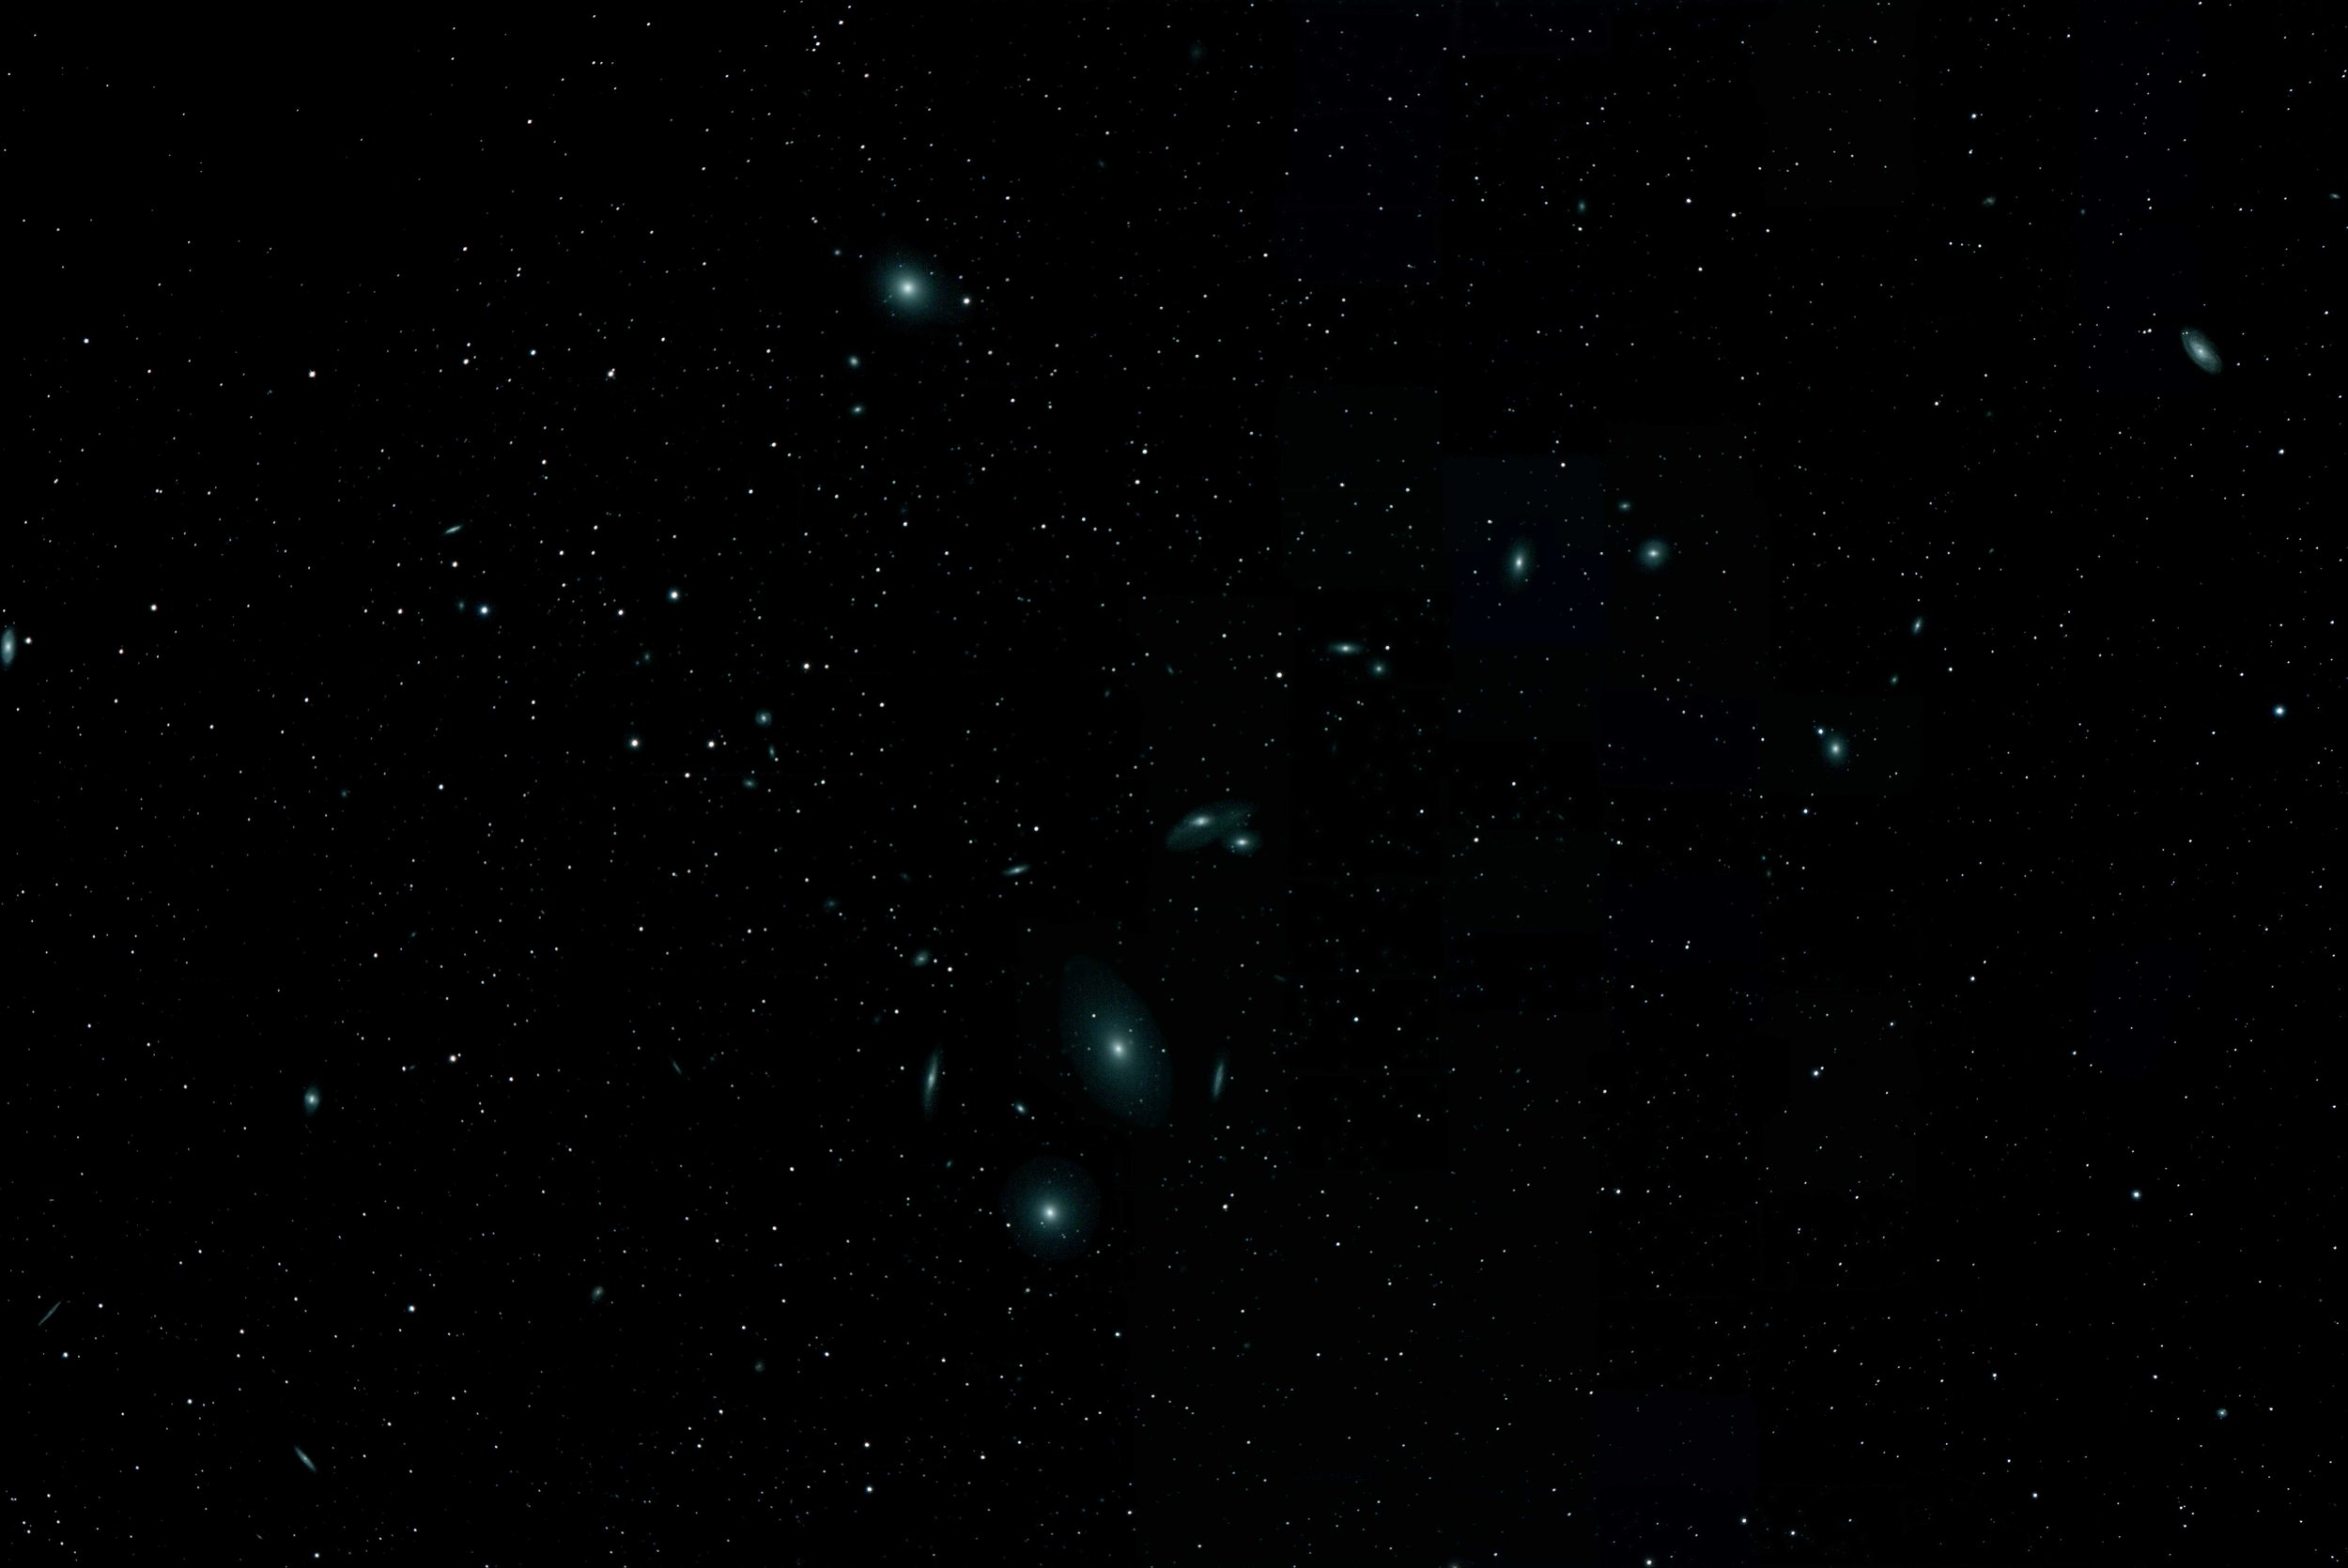 "Markarian's Chain" in the Virgo Galaxy Cluster